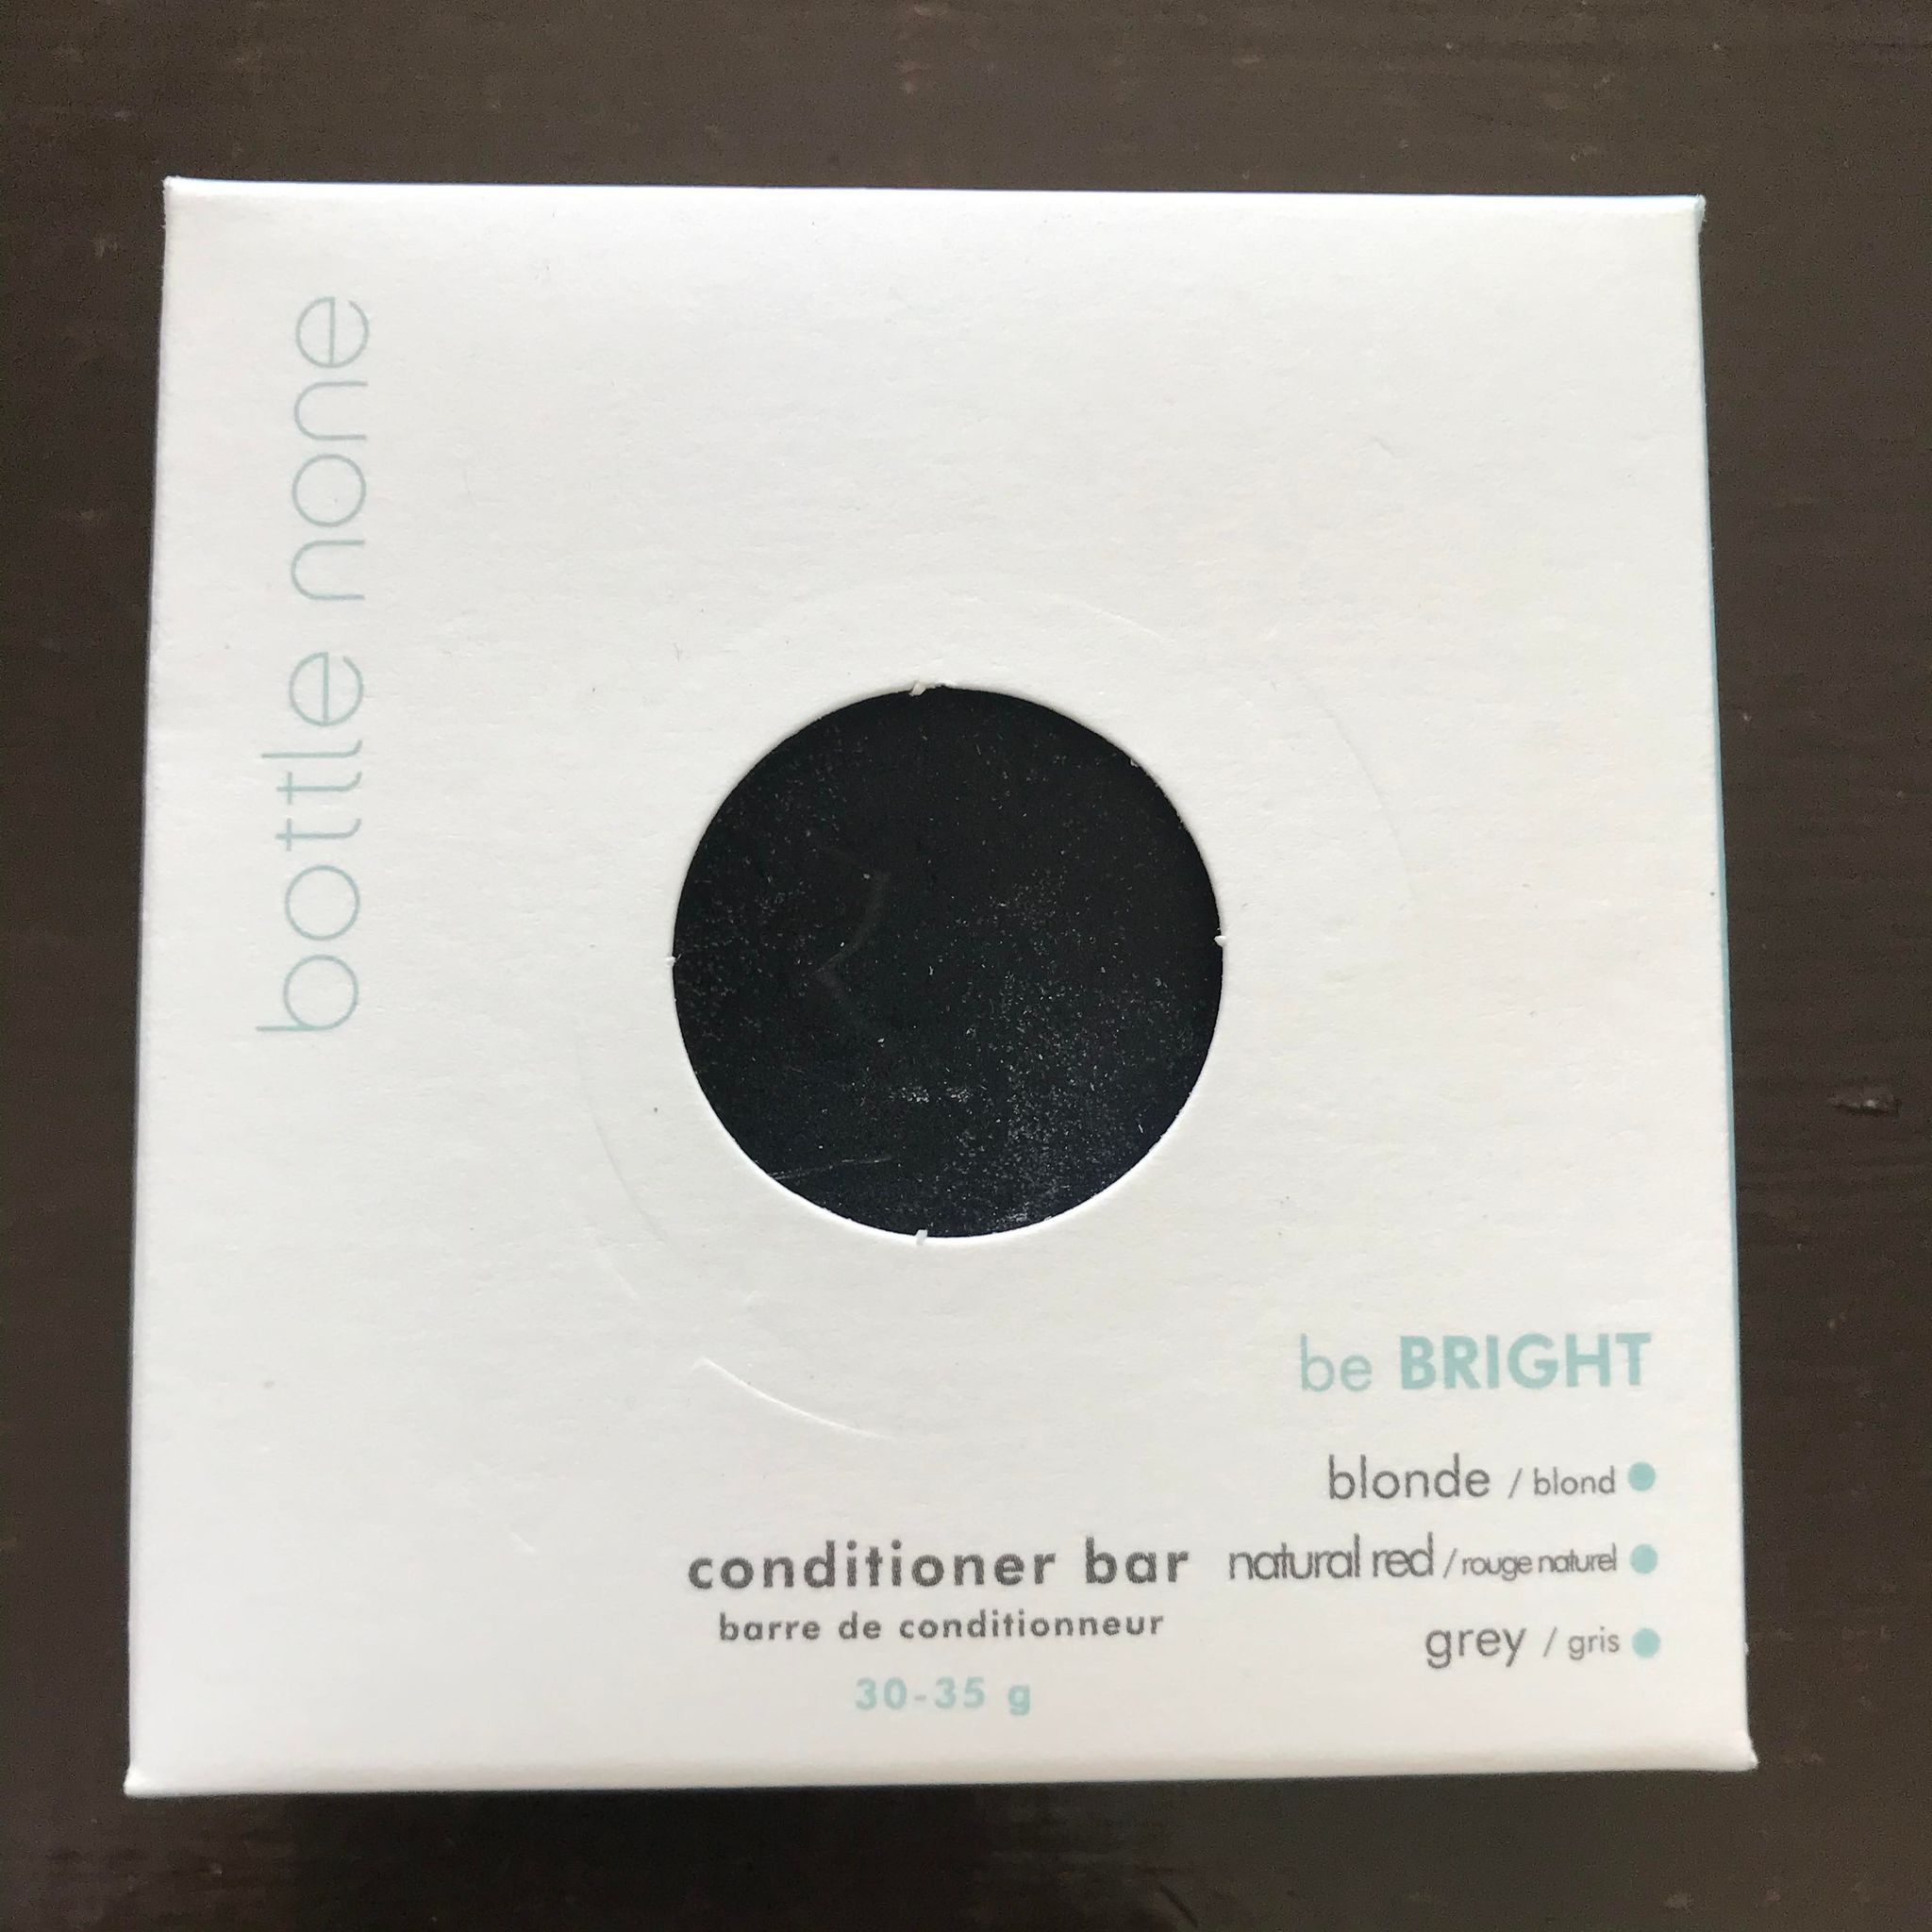 be bright bottle none conditioner bar in a zero waste box for blonde, natural red  or grey hair made in canada